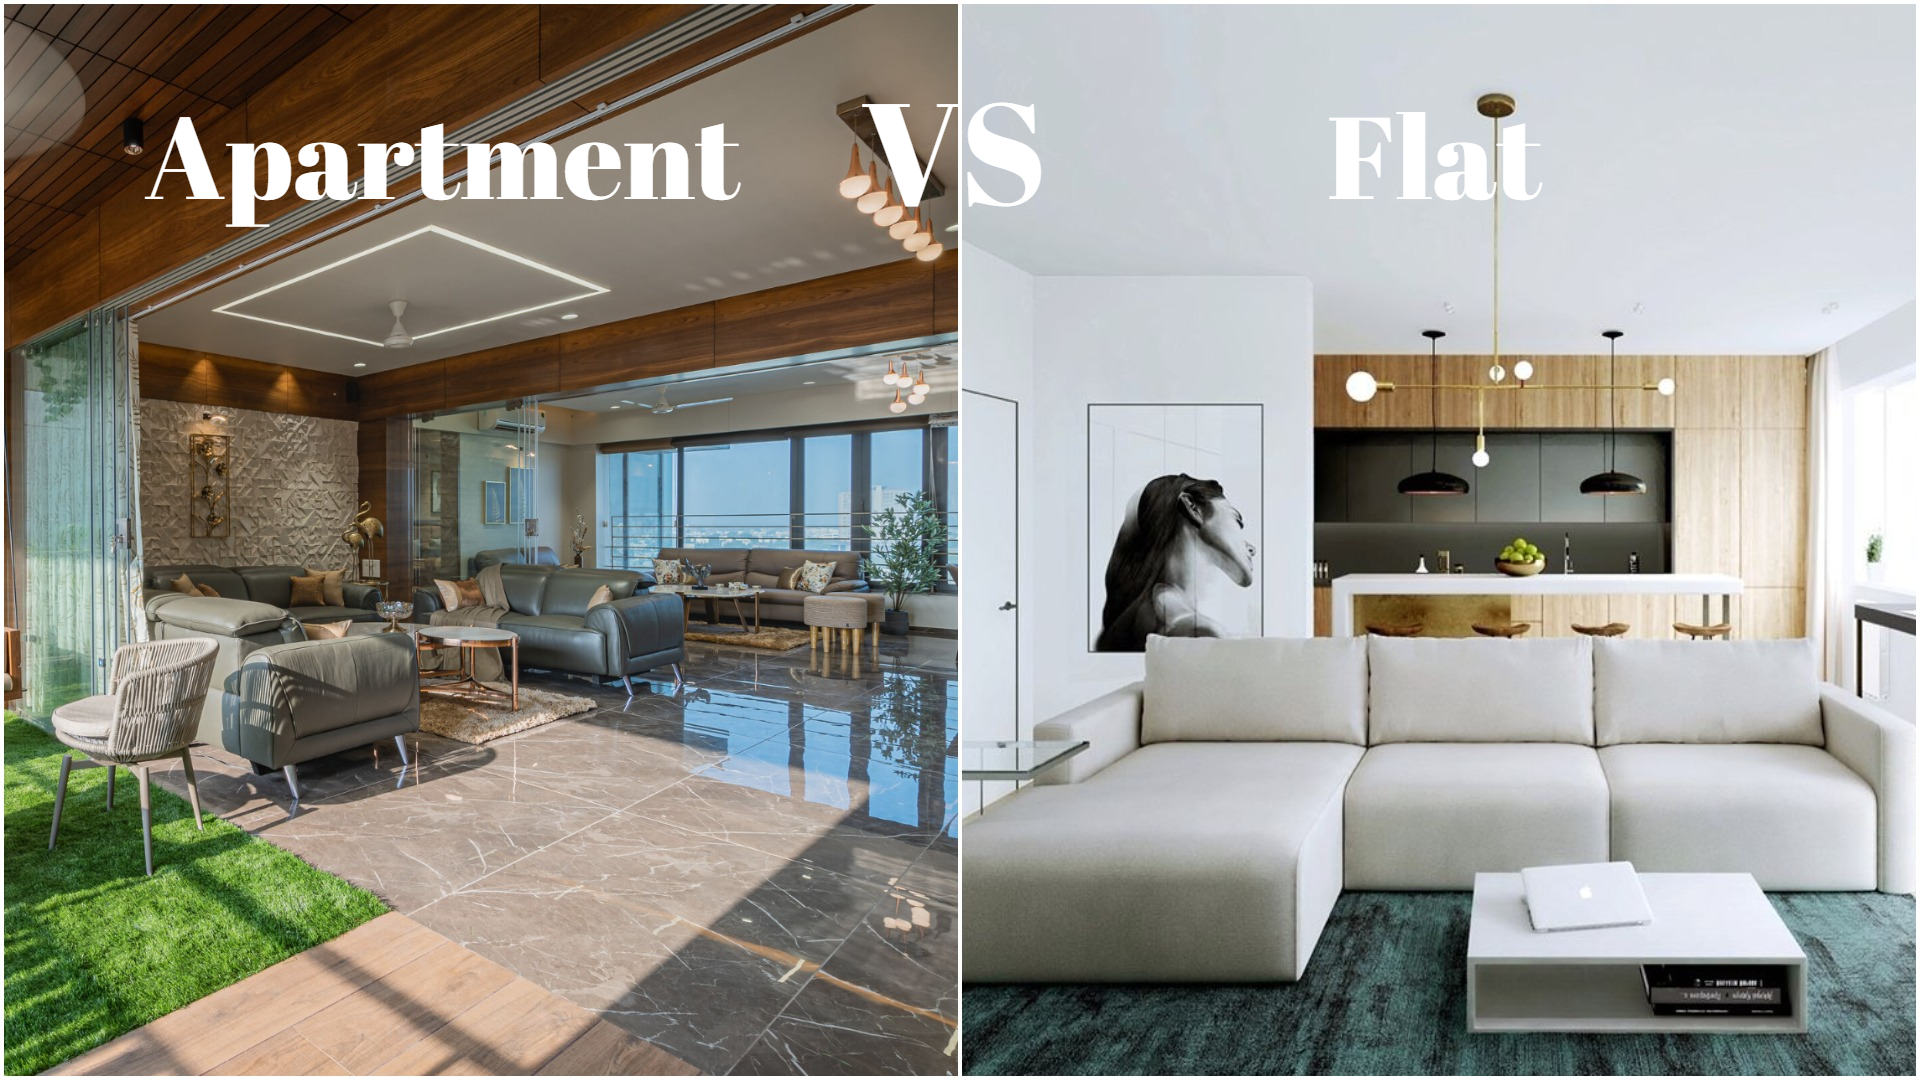 Difference Between Apartment and Flat